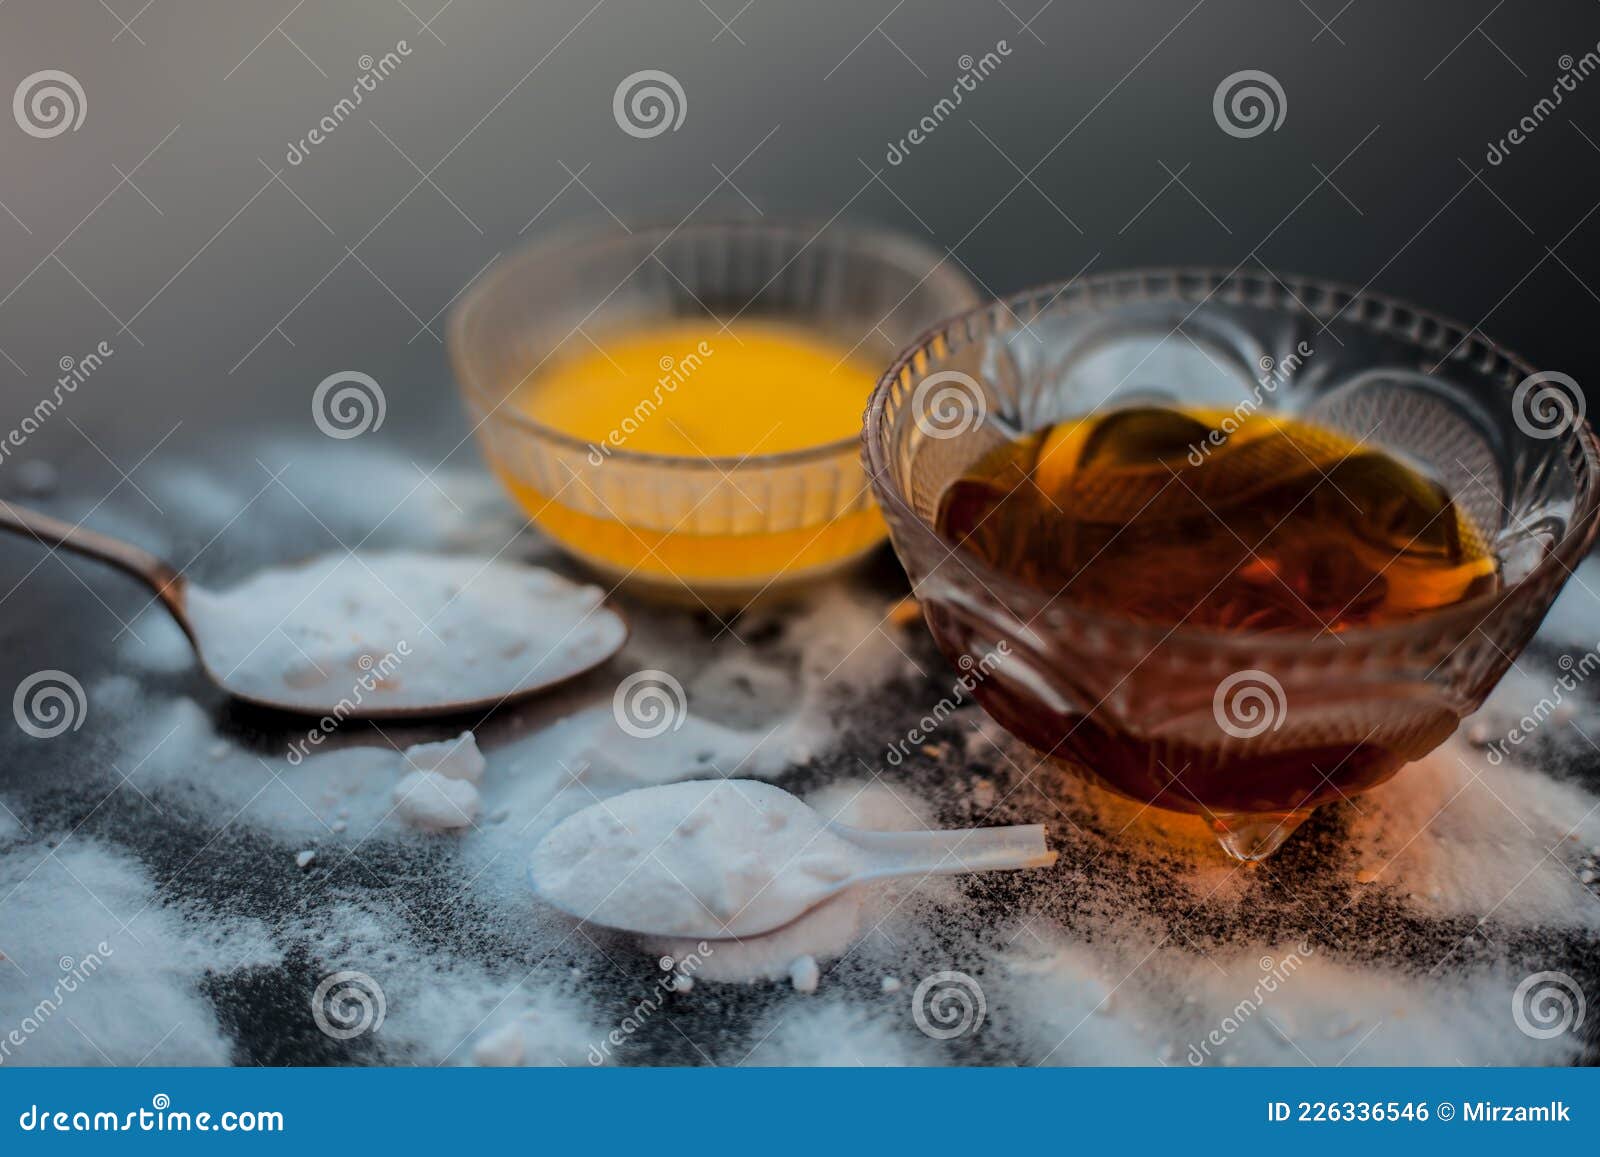 baking soda face mask in a glass bowl on wooden surface along with baking soda powder and honey and eggs